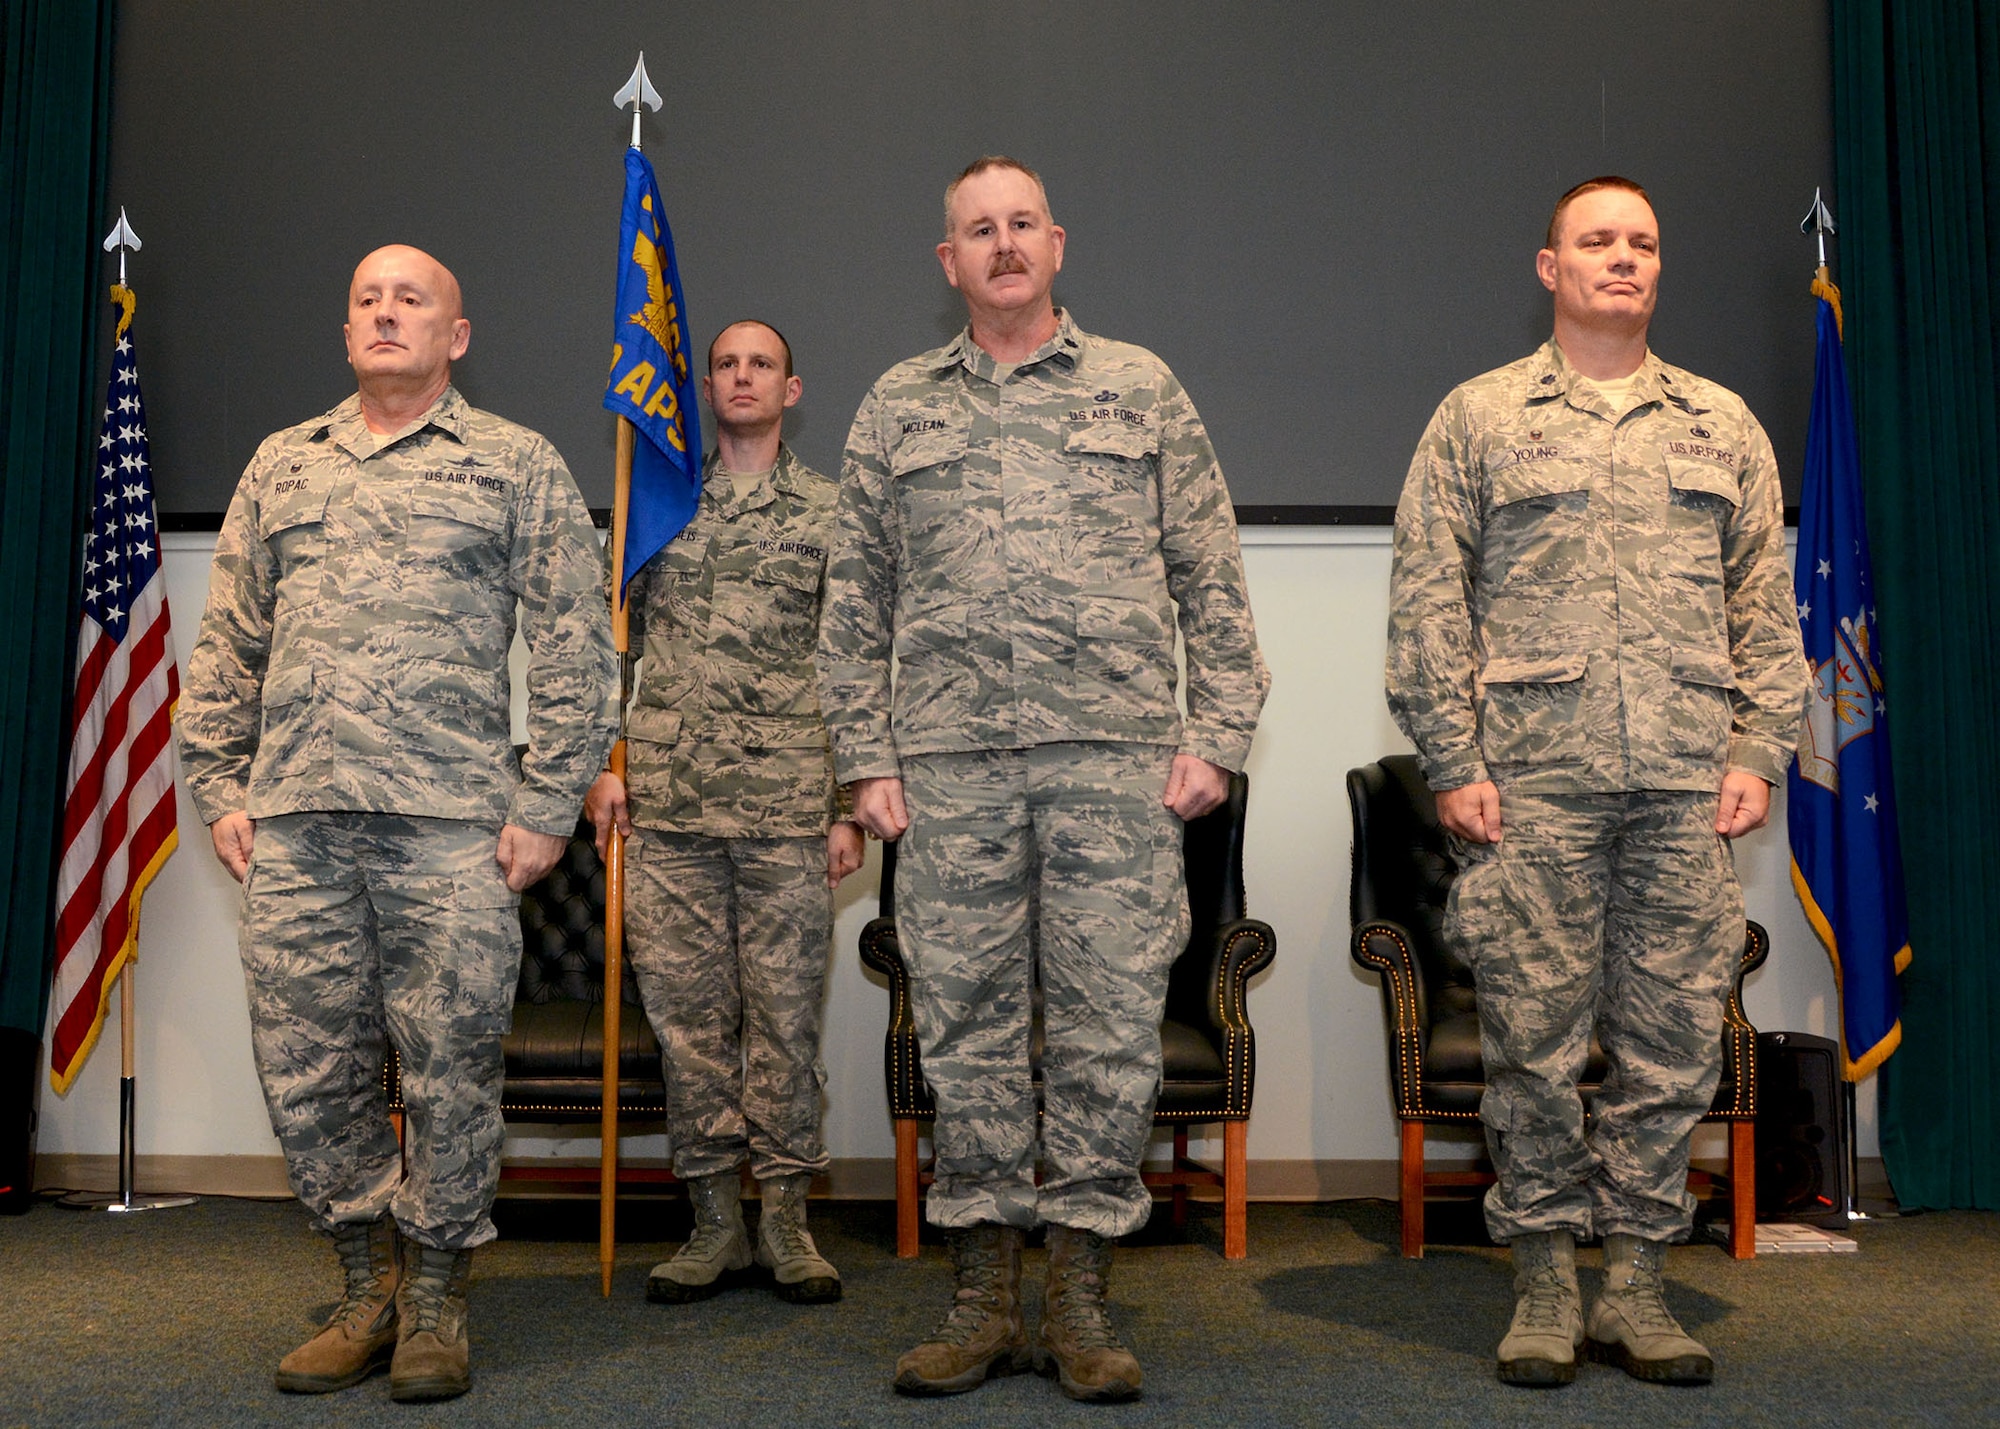 Lt. Col. Darryl McLean, center, stands before the 72nd Aerial Port Squadron after being named their new commander Feb. 10, 2019, Tinker Air Force Base, Oklahoma. Col. Richard Ropac, left, 507th Mission Support Group commander, transferred the guidon to McLean from Lt. Col. William Young, right, after Young served as 72nd APS for nine years. (U.S. Air Force photo by Tech. Sgt. Samantha Mathison)